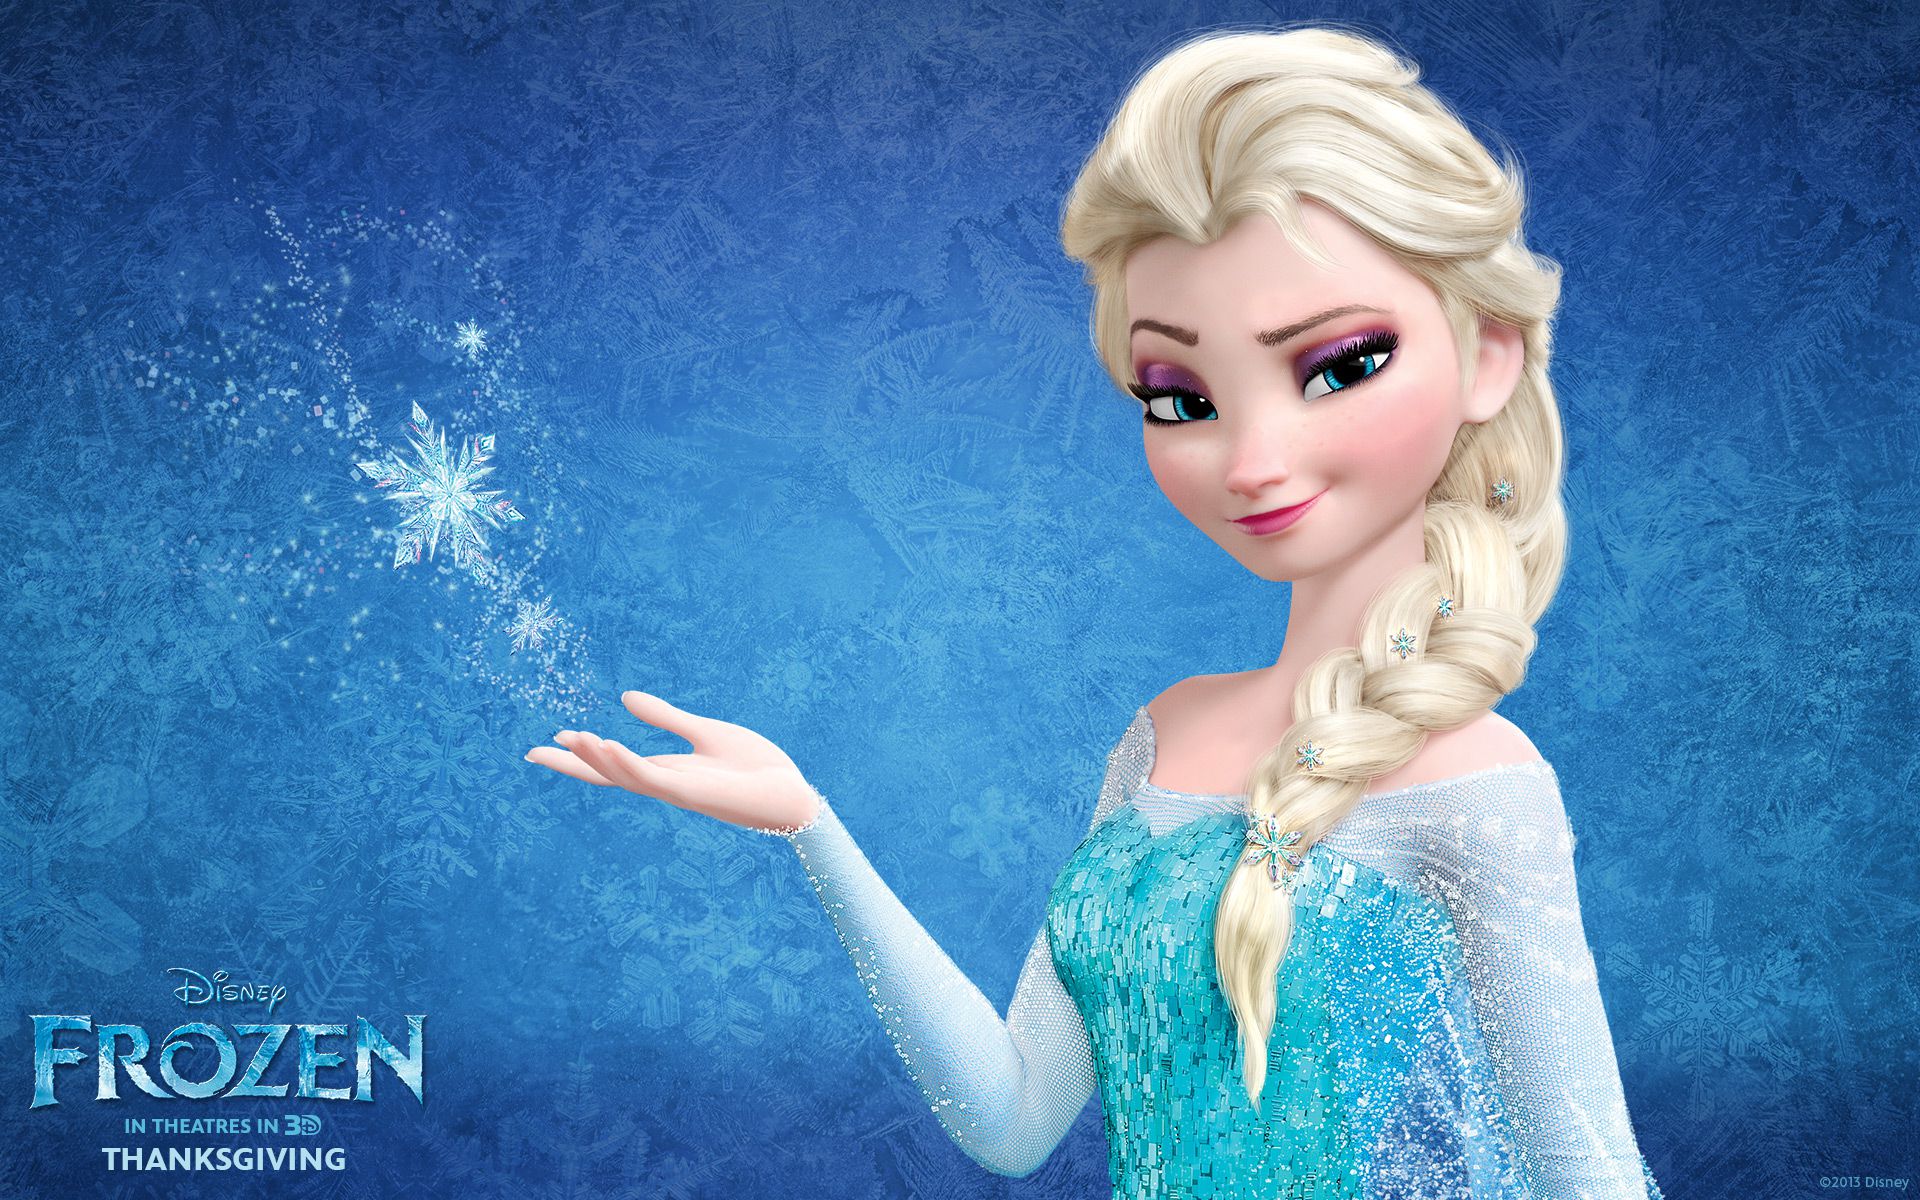 Frozen for apple download free